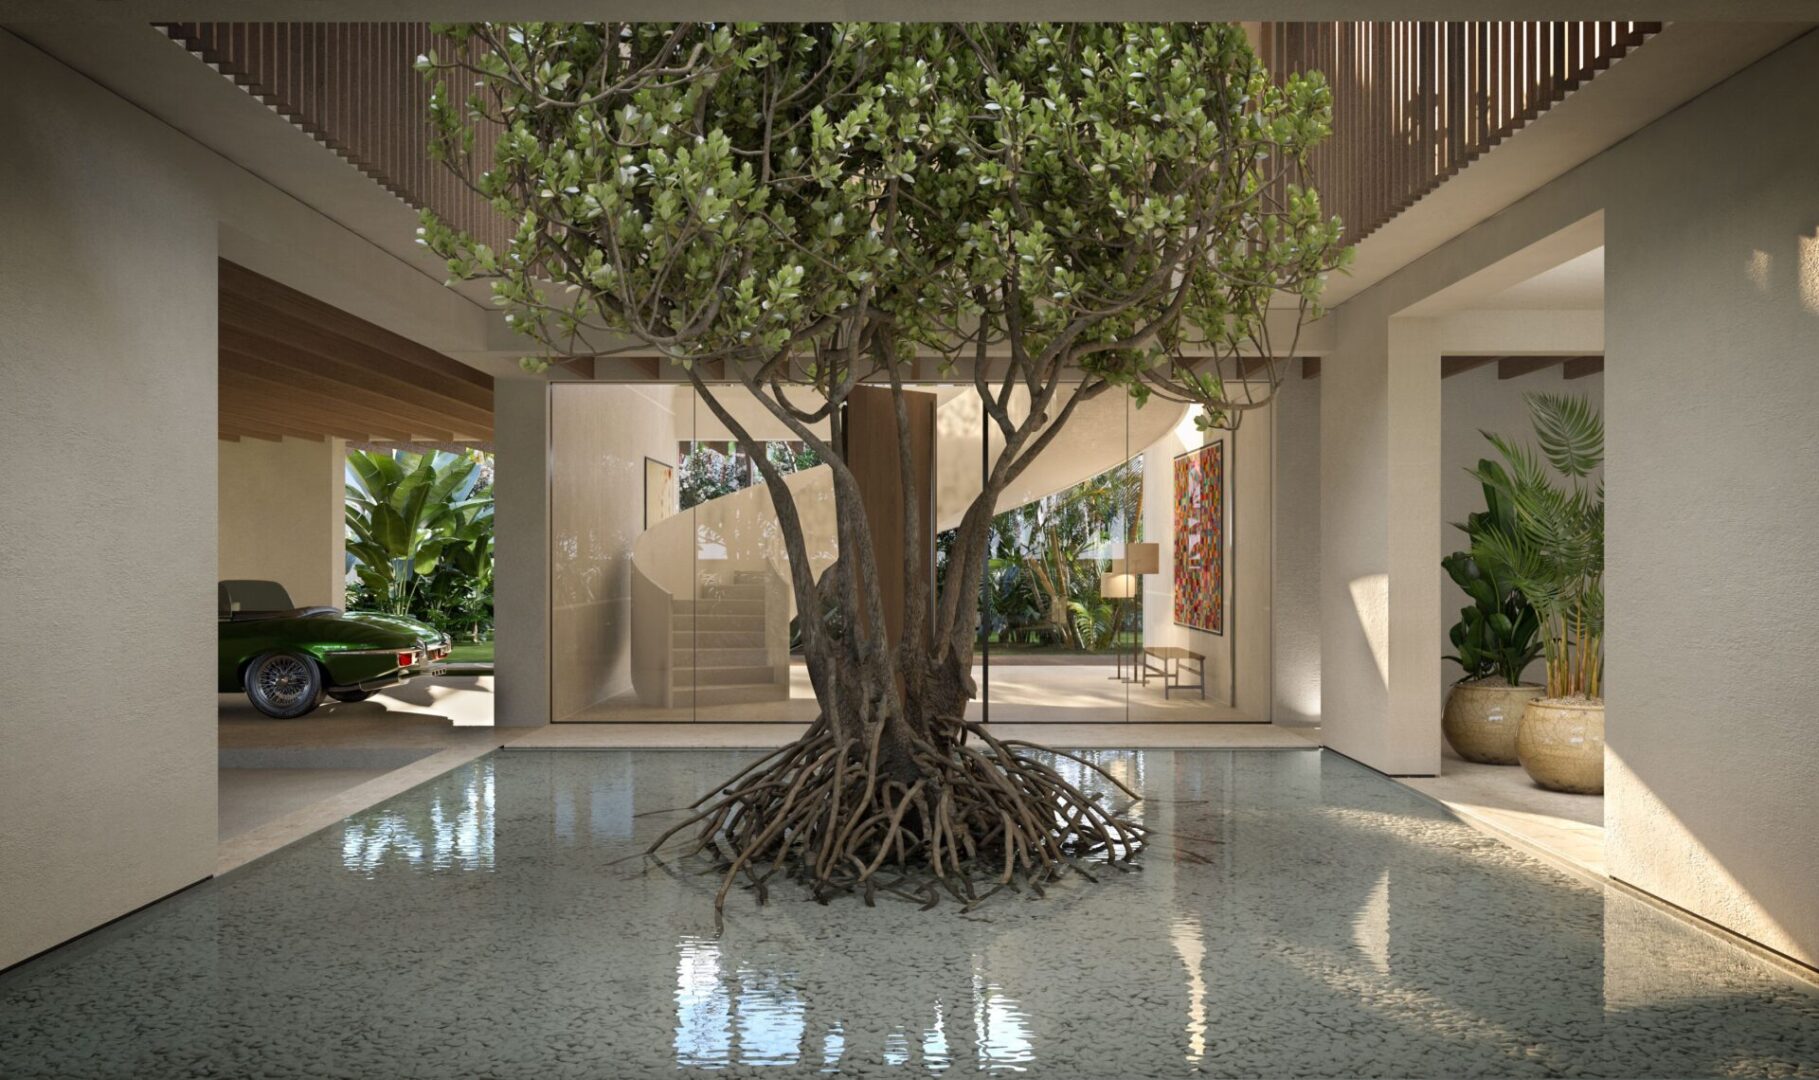 A beautiful tree in the entrance on the house